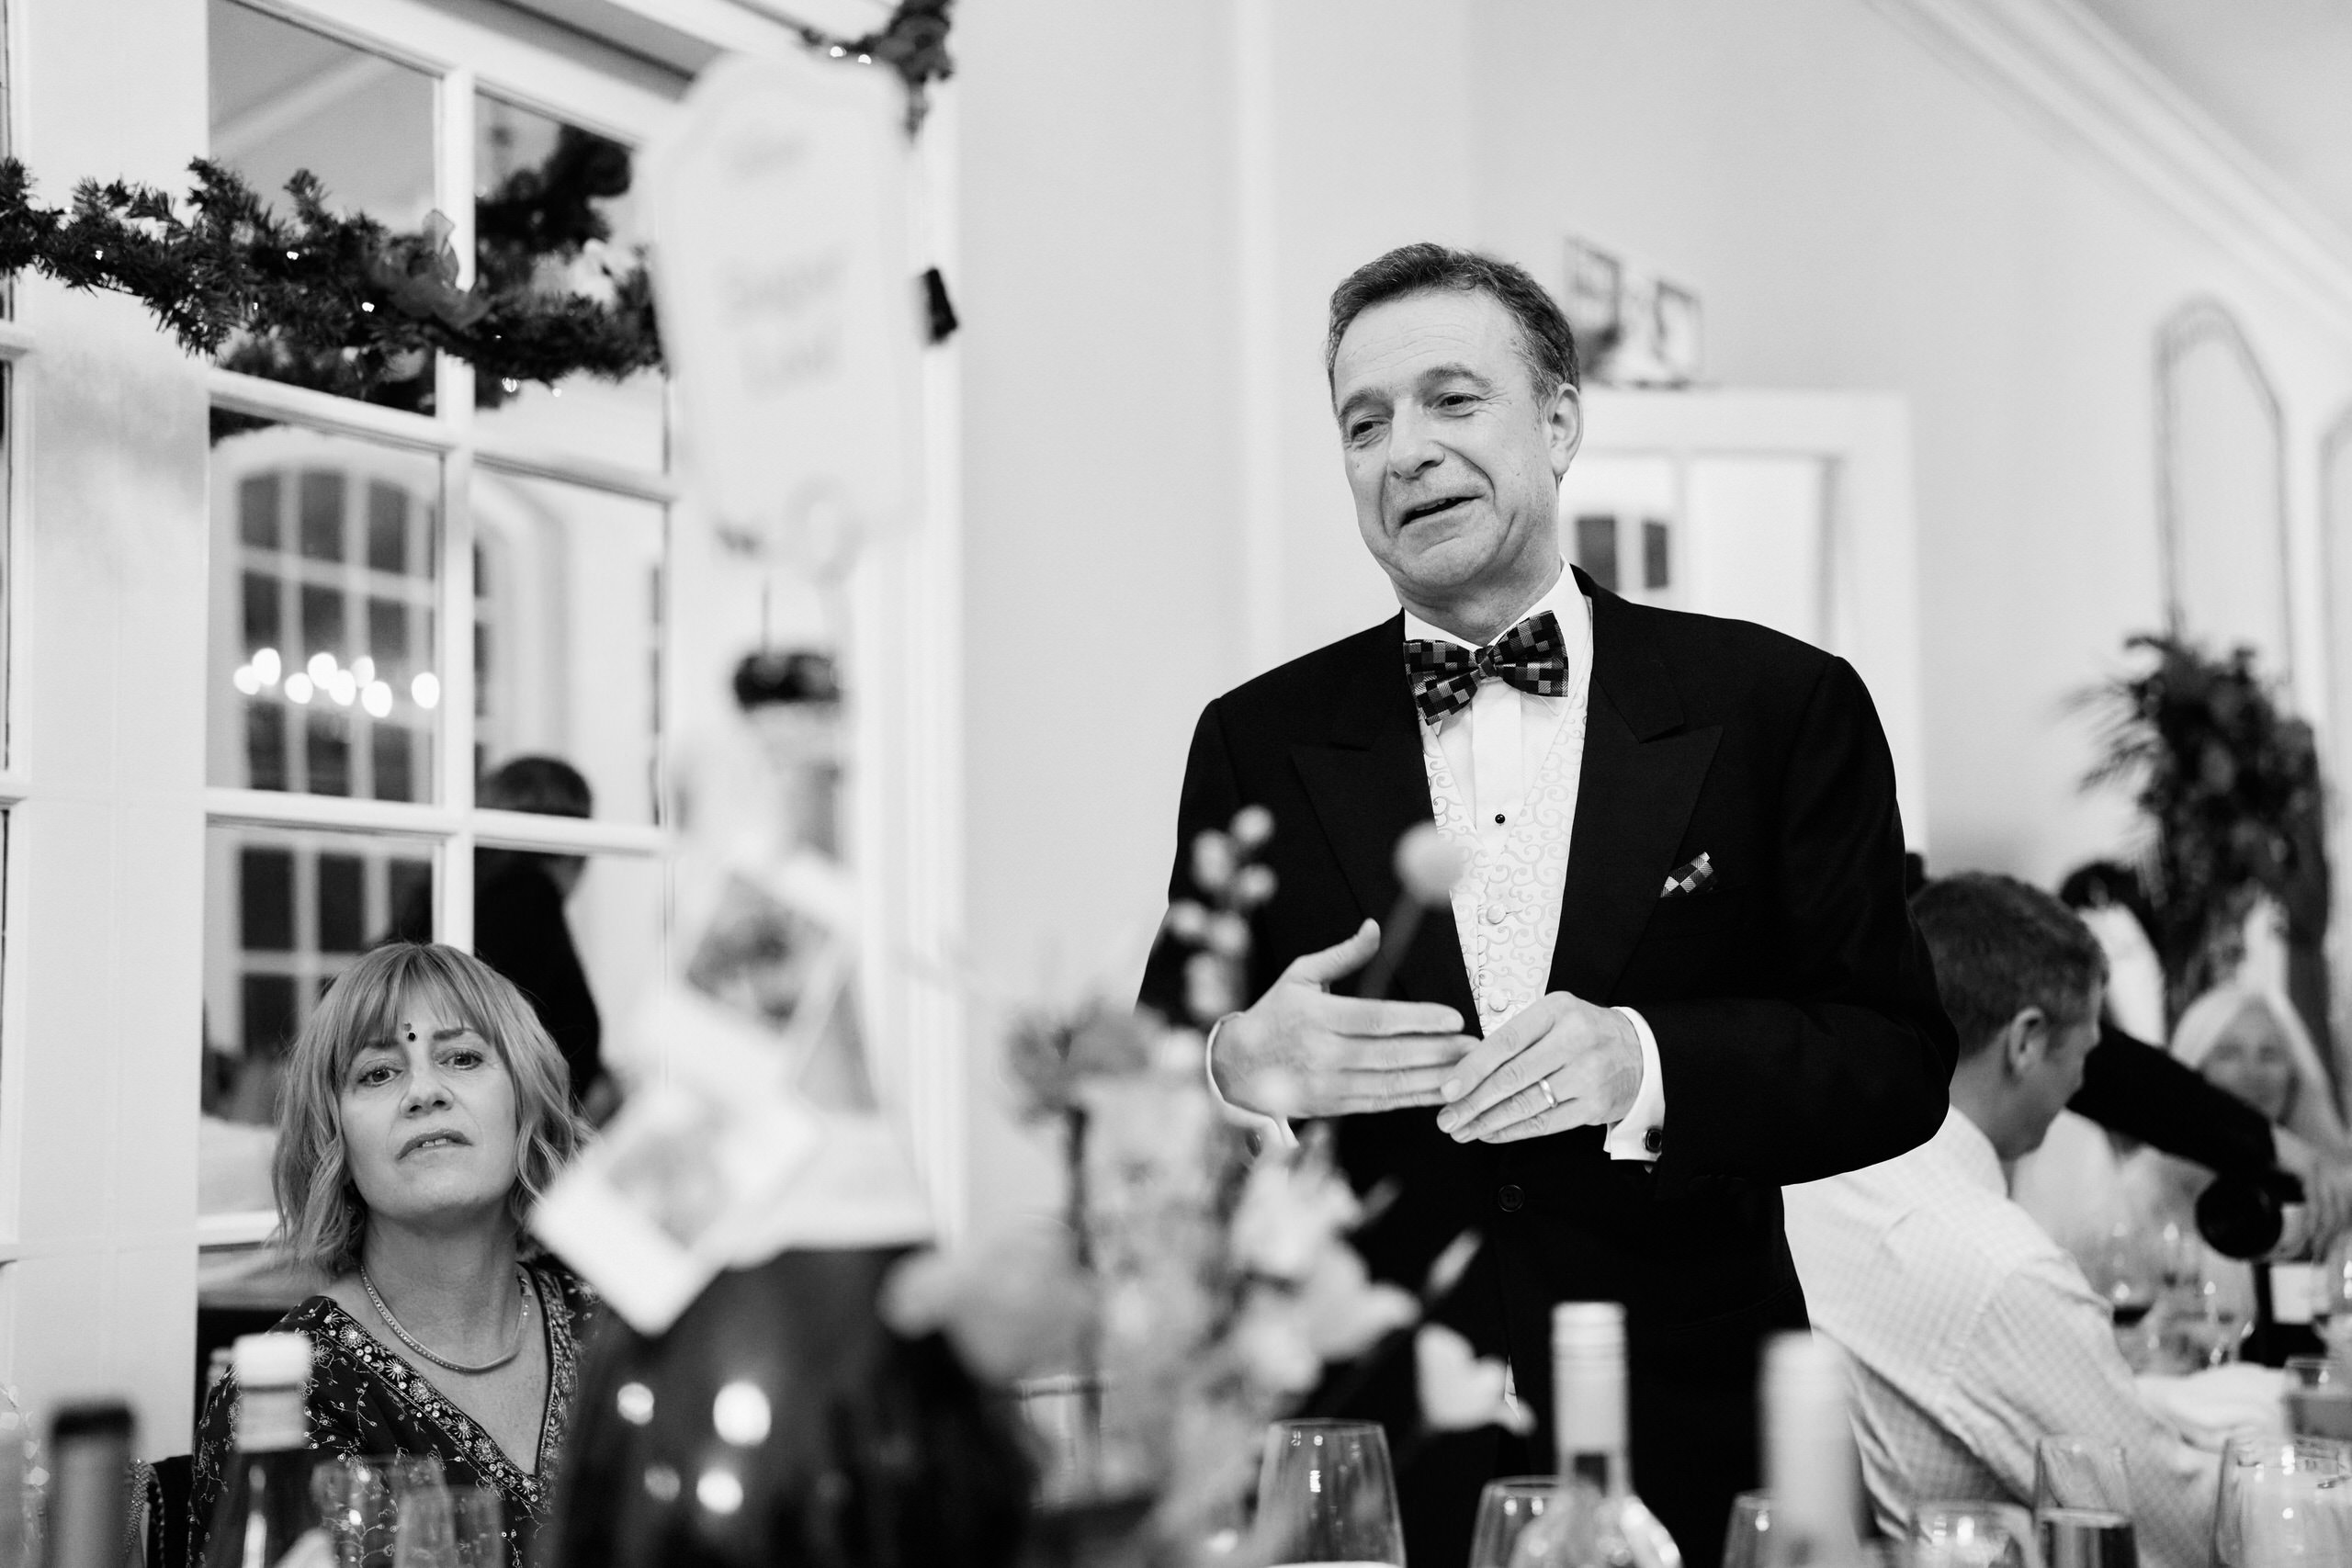 A guy in a suit talking at a wedding.